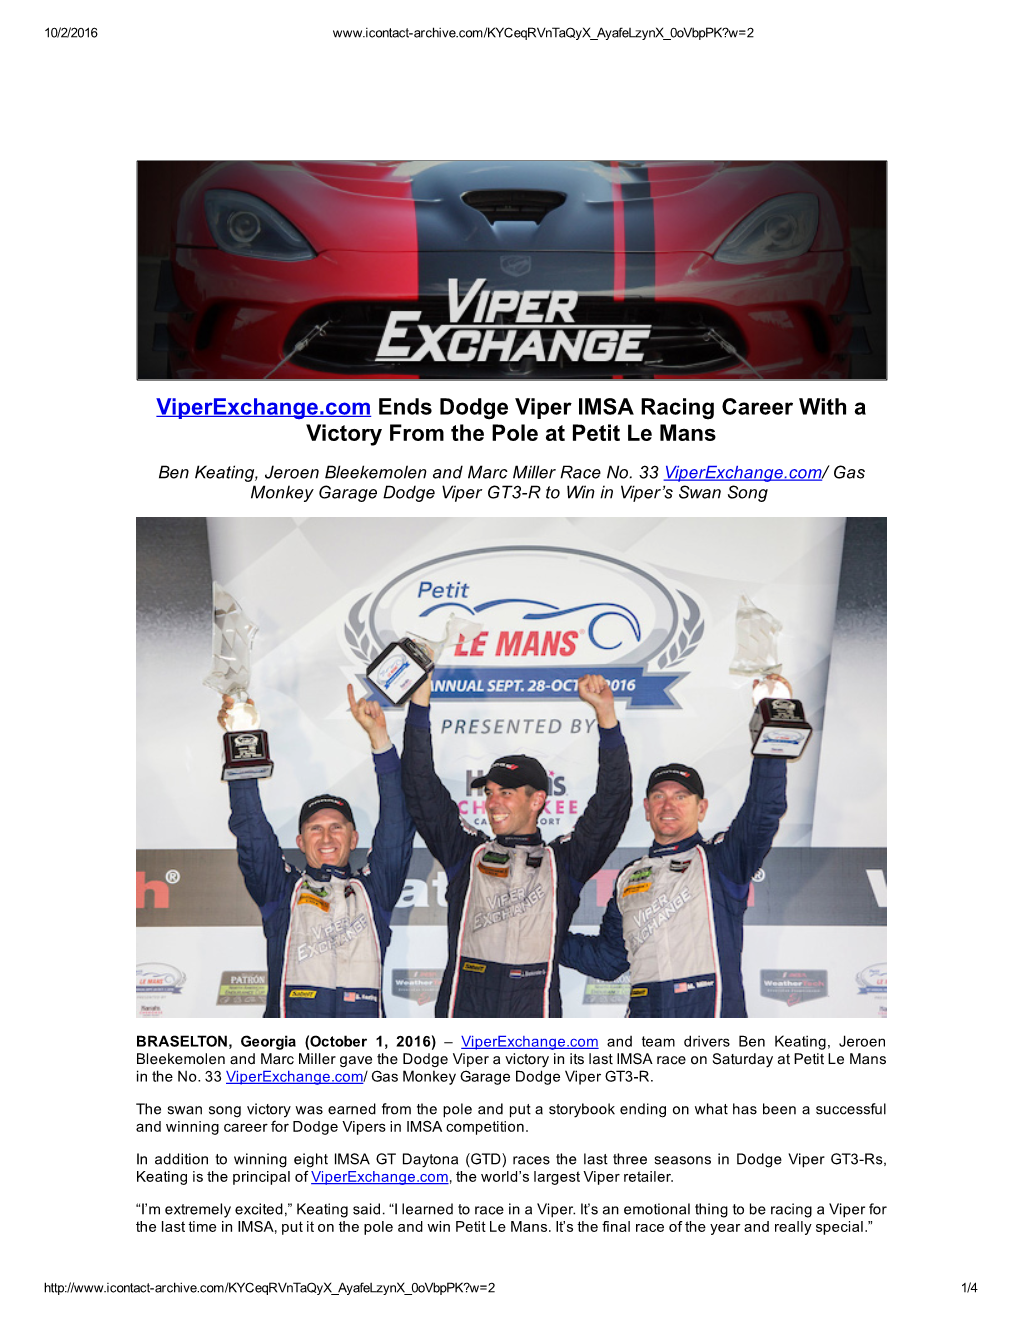 Viperexchange.Com Ends Dodge Viper IMSA Racing Career with a Victory from the Pole at Petit Le Mans